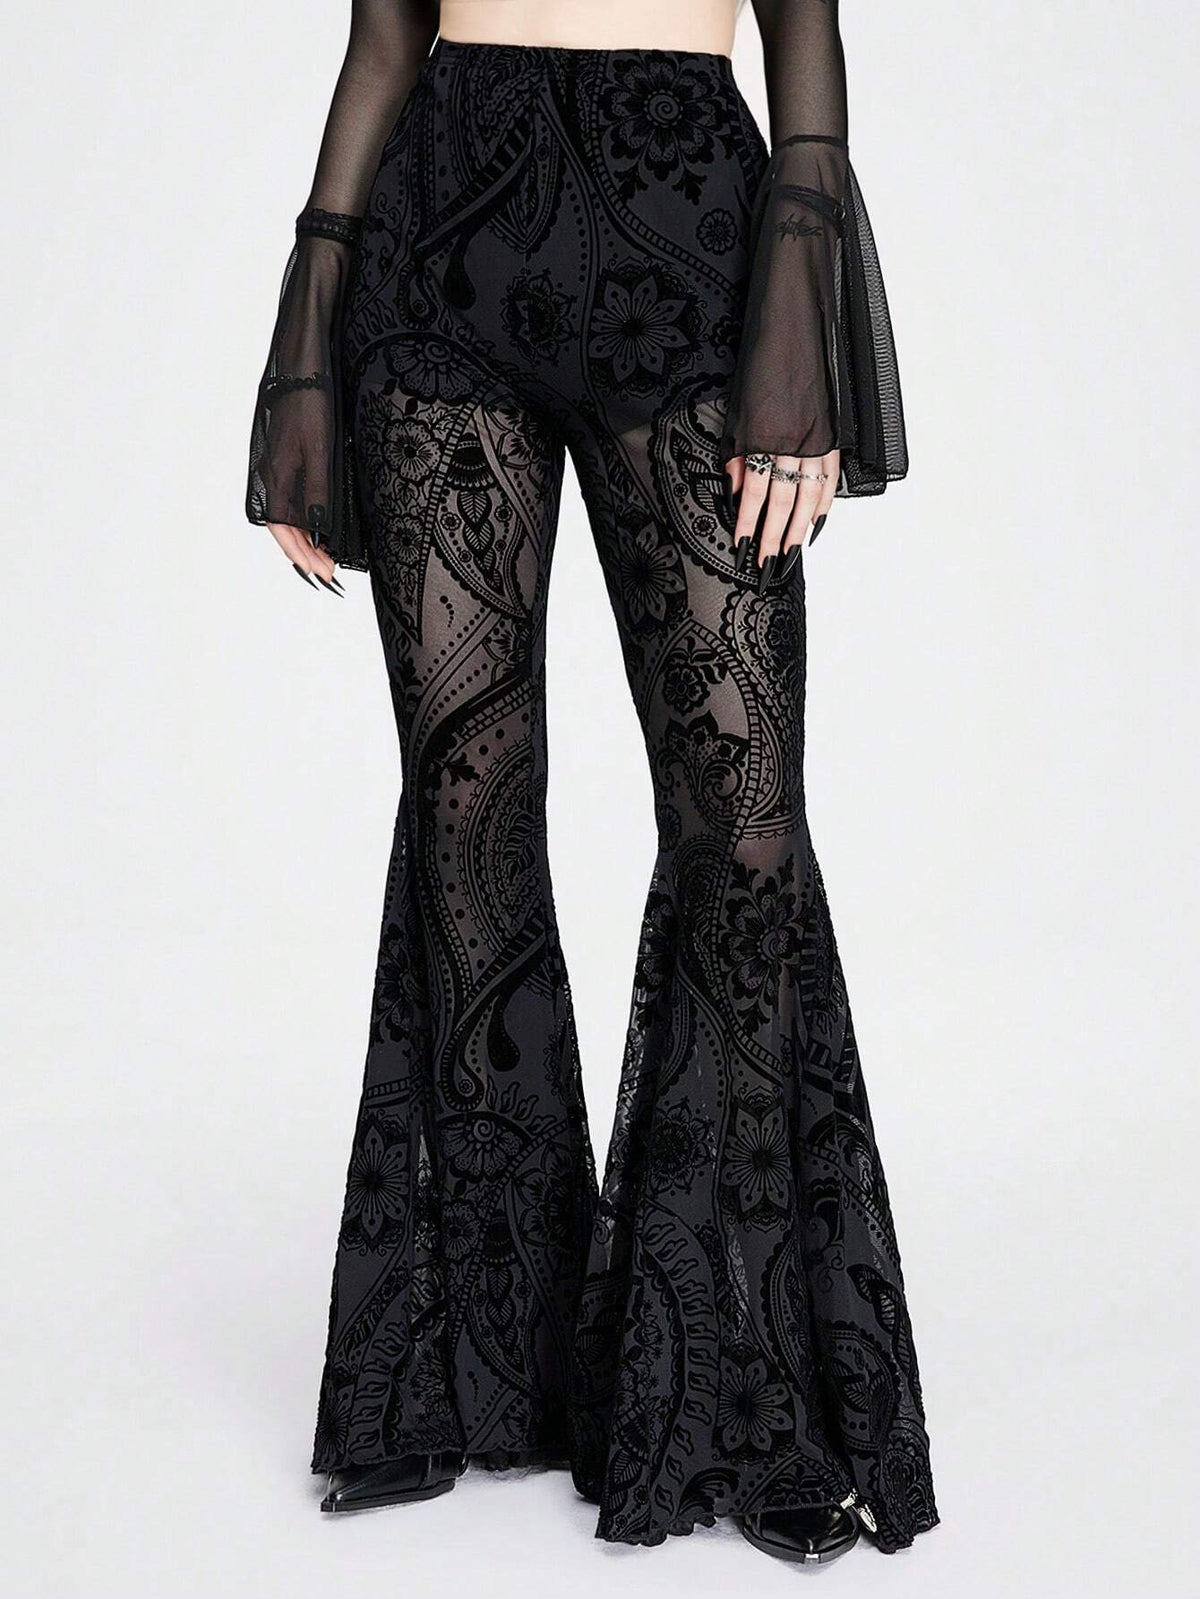 ROMWE Goth Mesh Paisley Pattern Flocked Lining Pants Transparent Flared Trousers